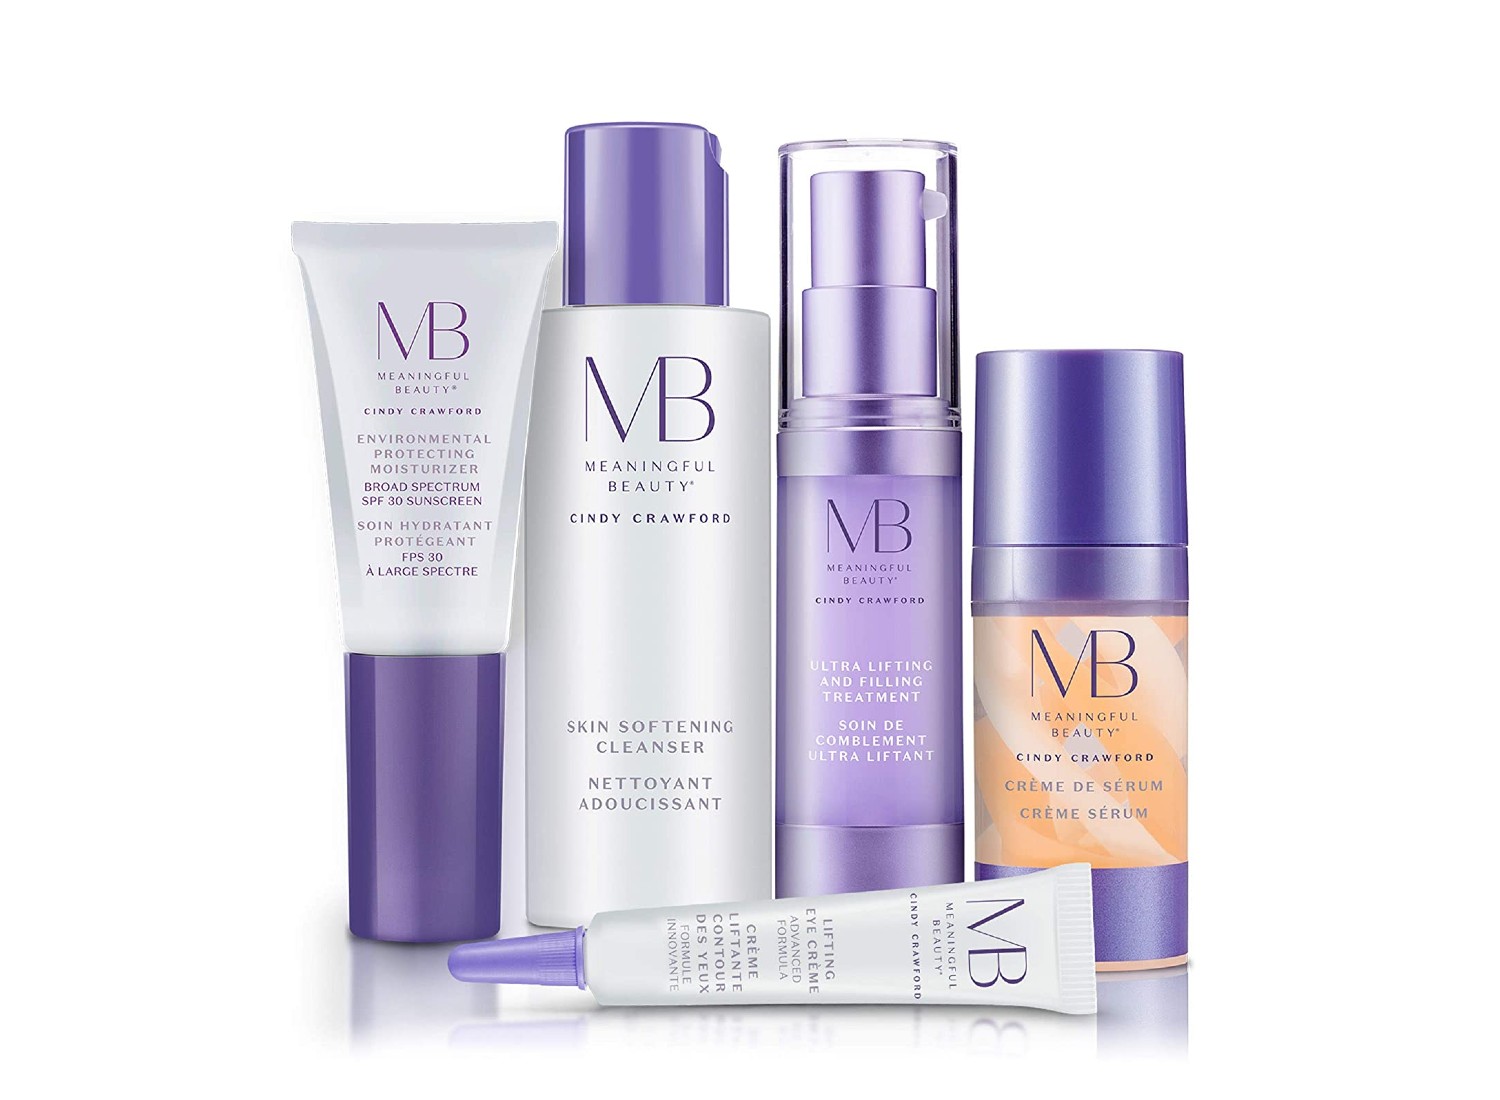 A five-piece Meaningful Beauty skincare system set on a white background.